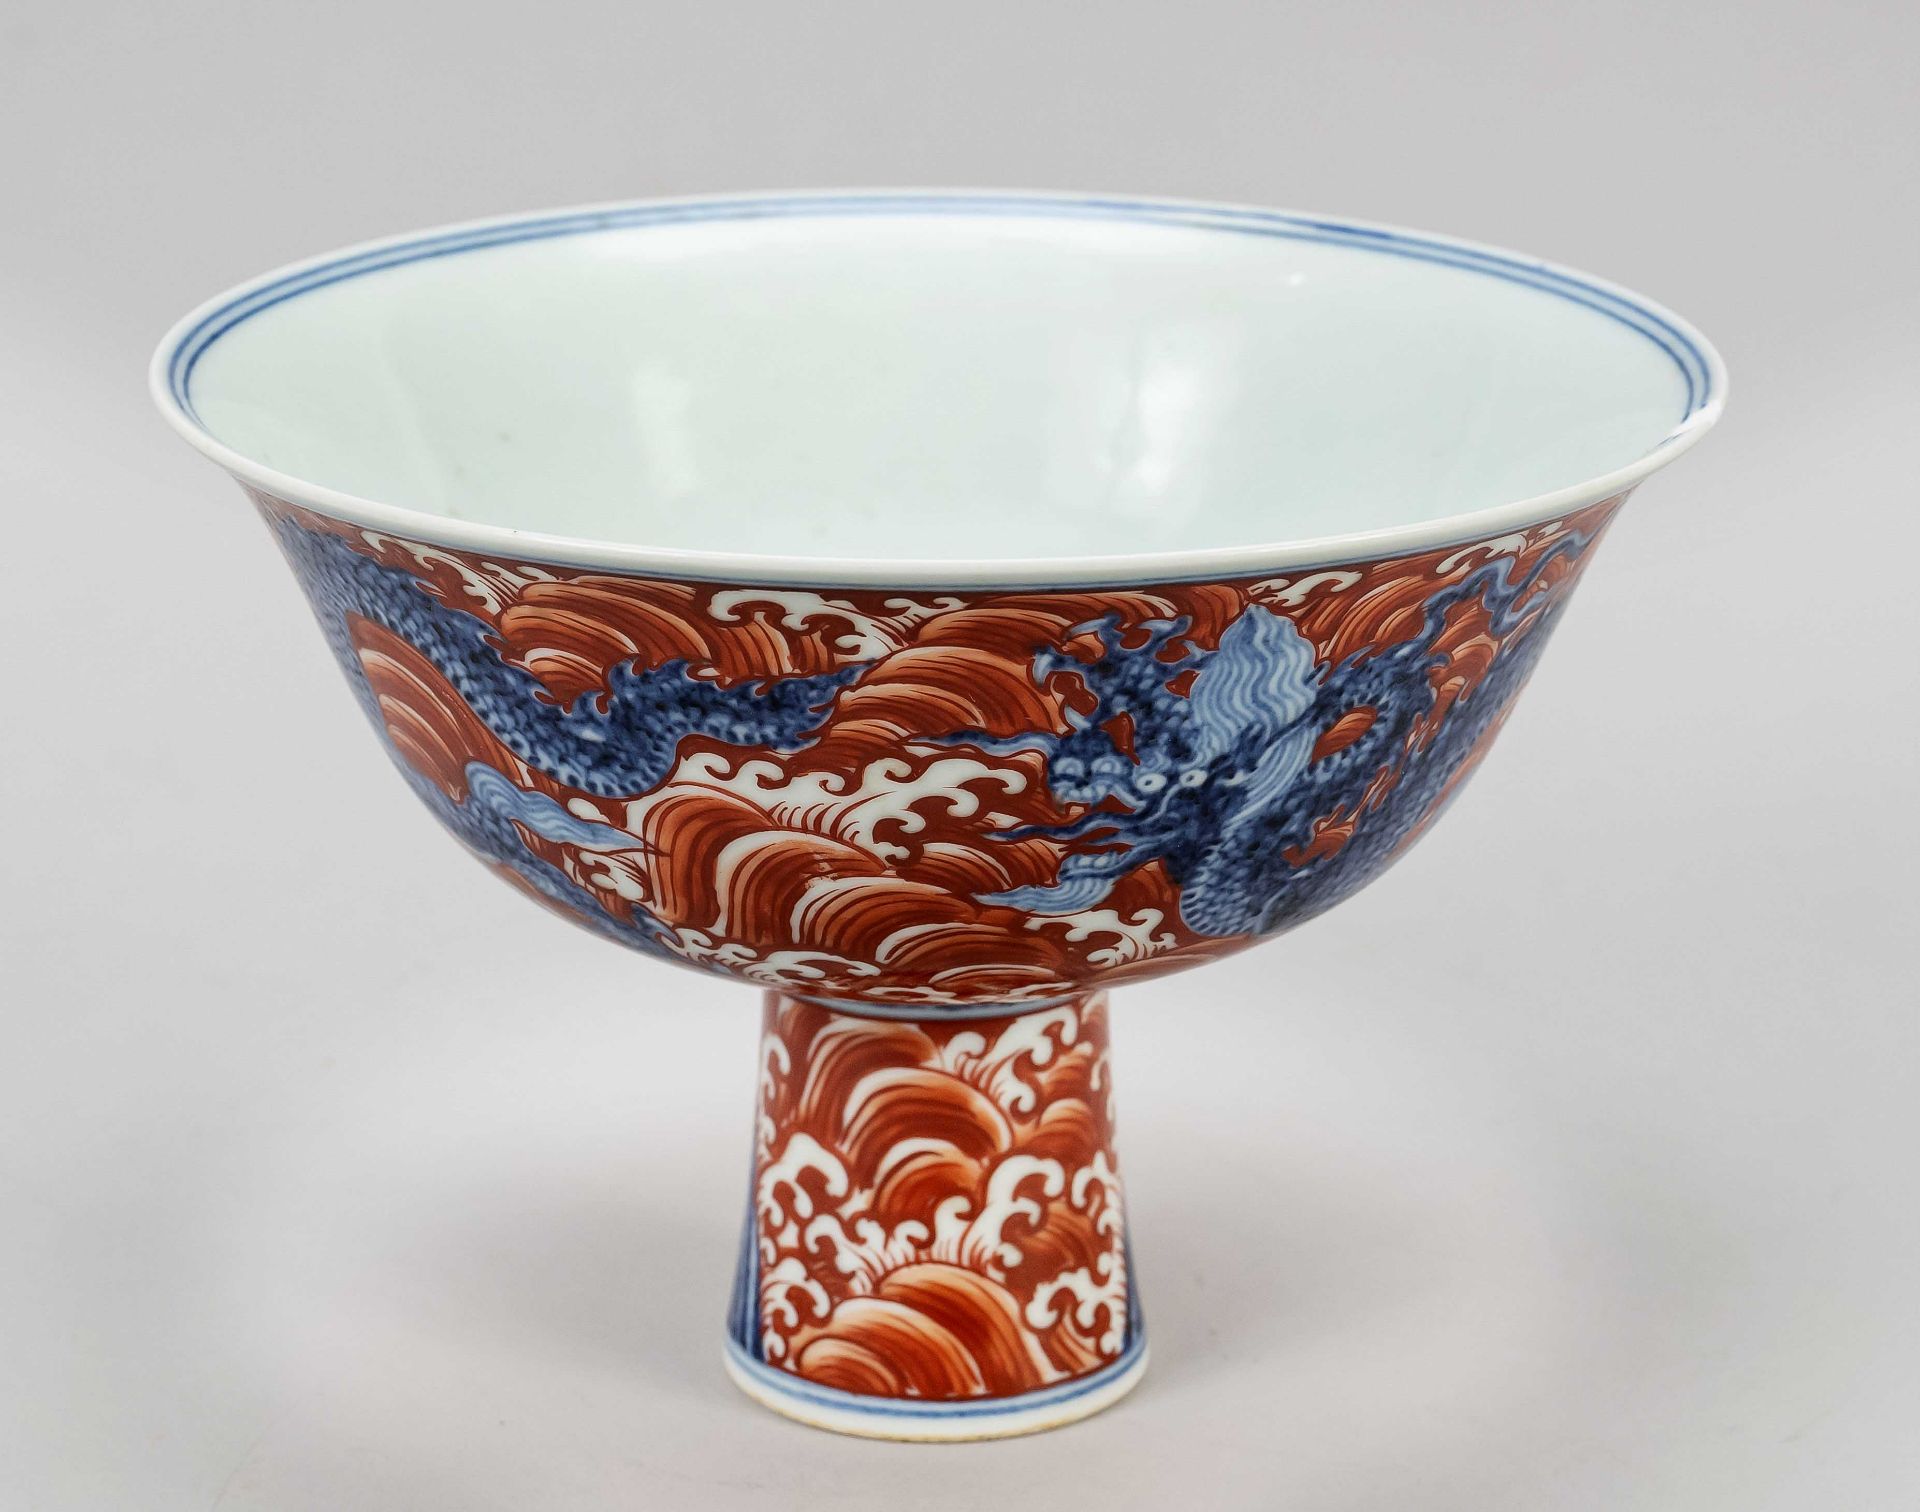 Large doucai cup on high base (so called stem cup), China, probably Qing dynasty(1644-1912) 19th